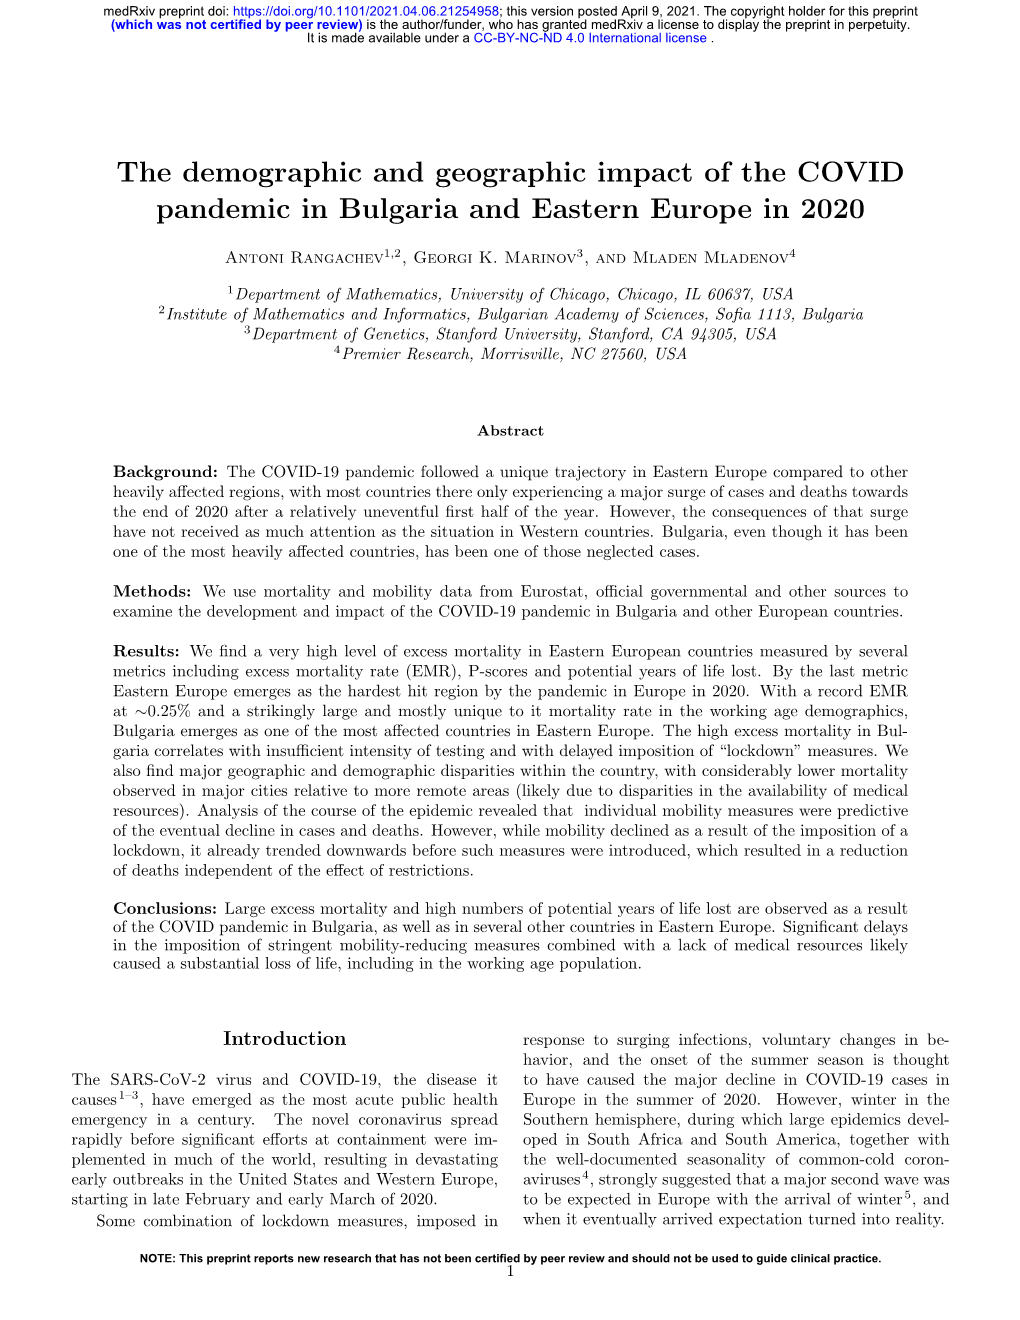 The Demographic and Geographic Impact of the COVID Pandemic in Bulgaria and Eastern Europe in 2020